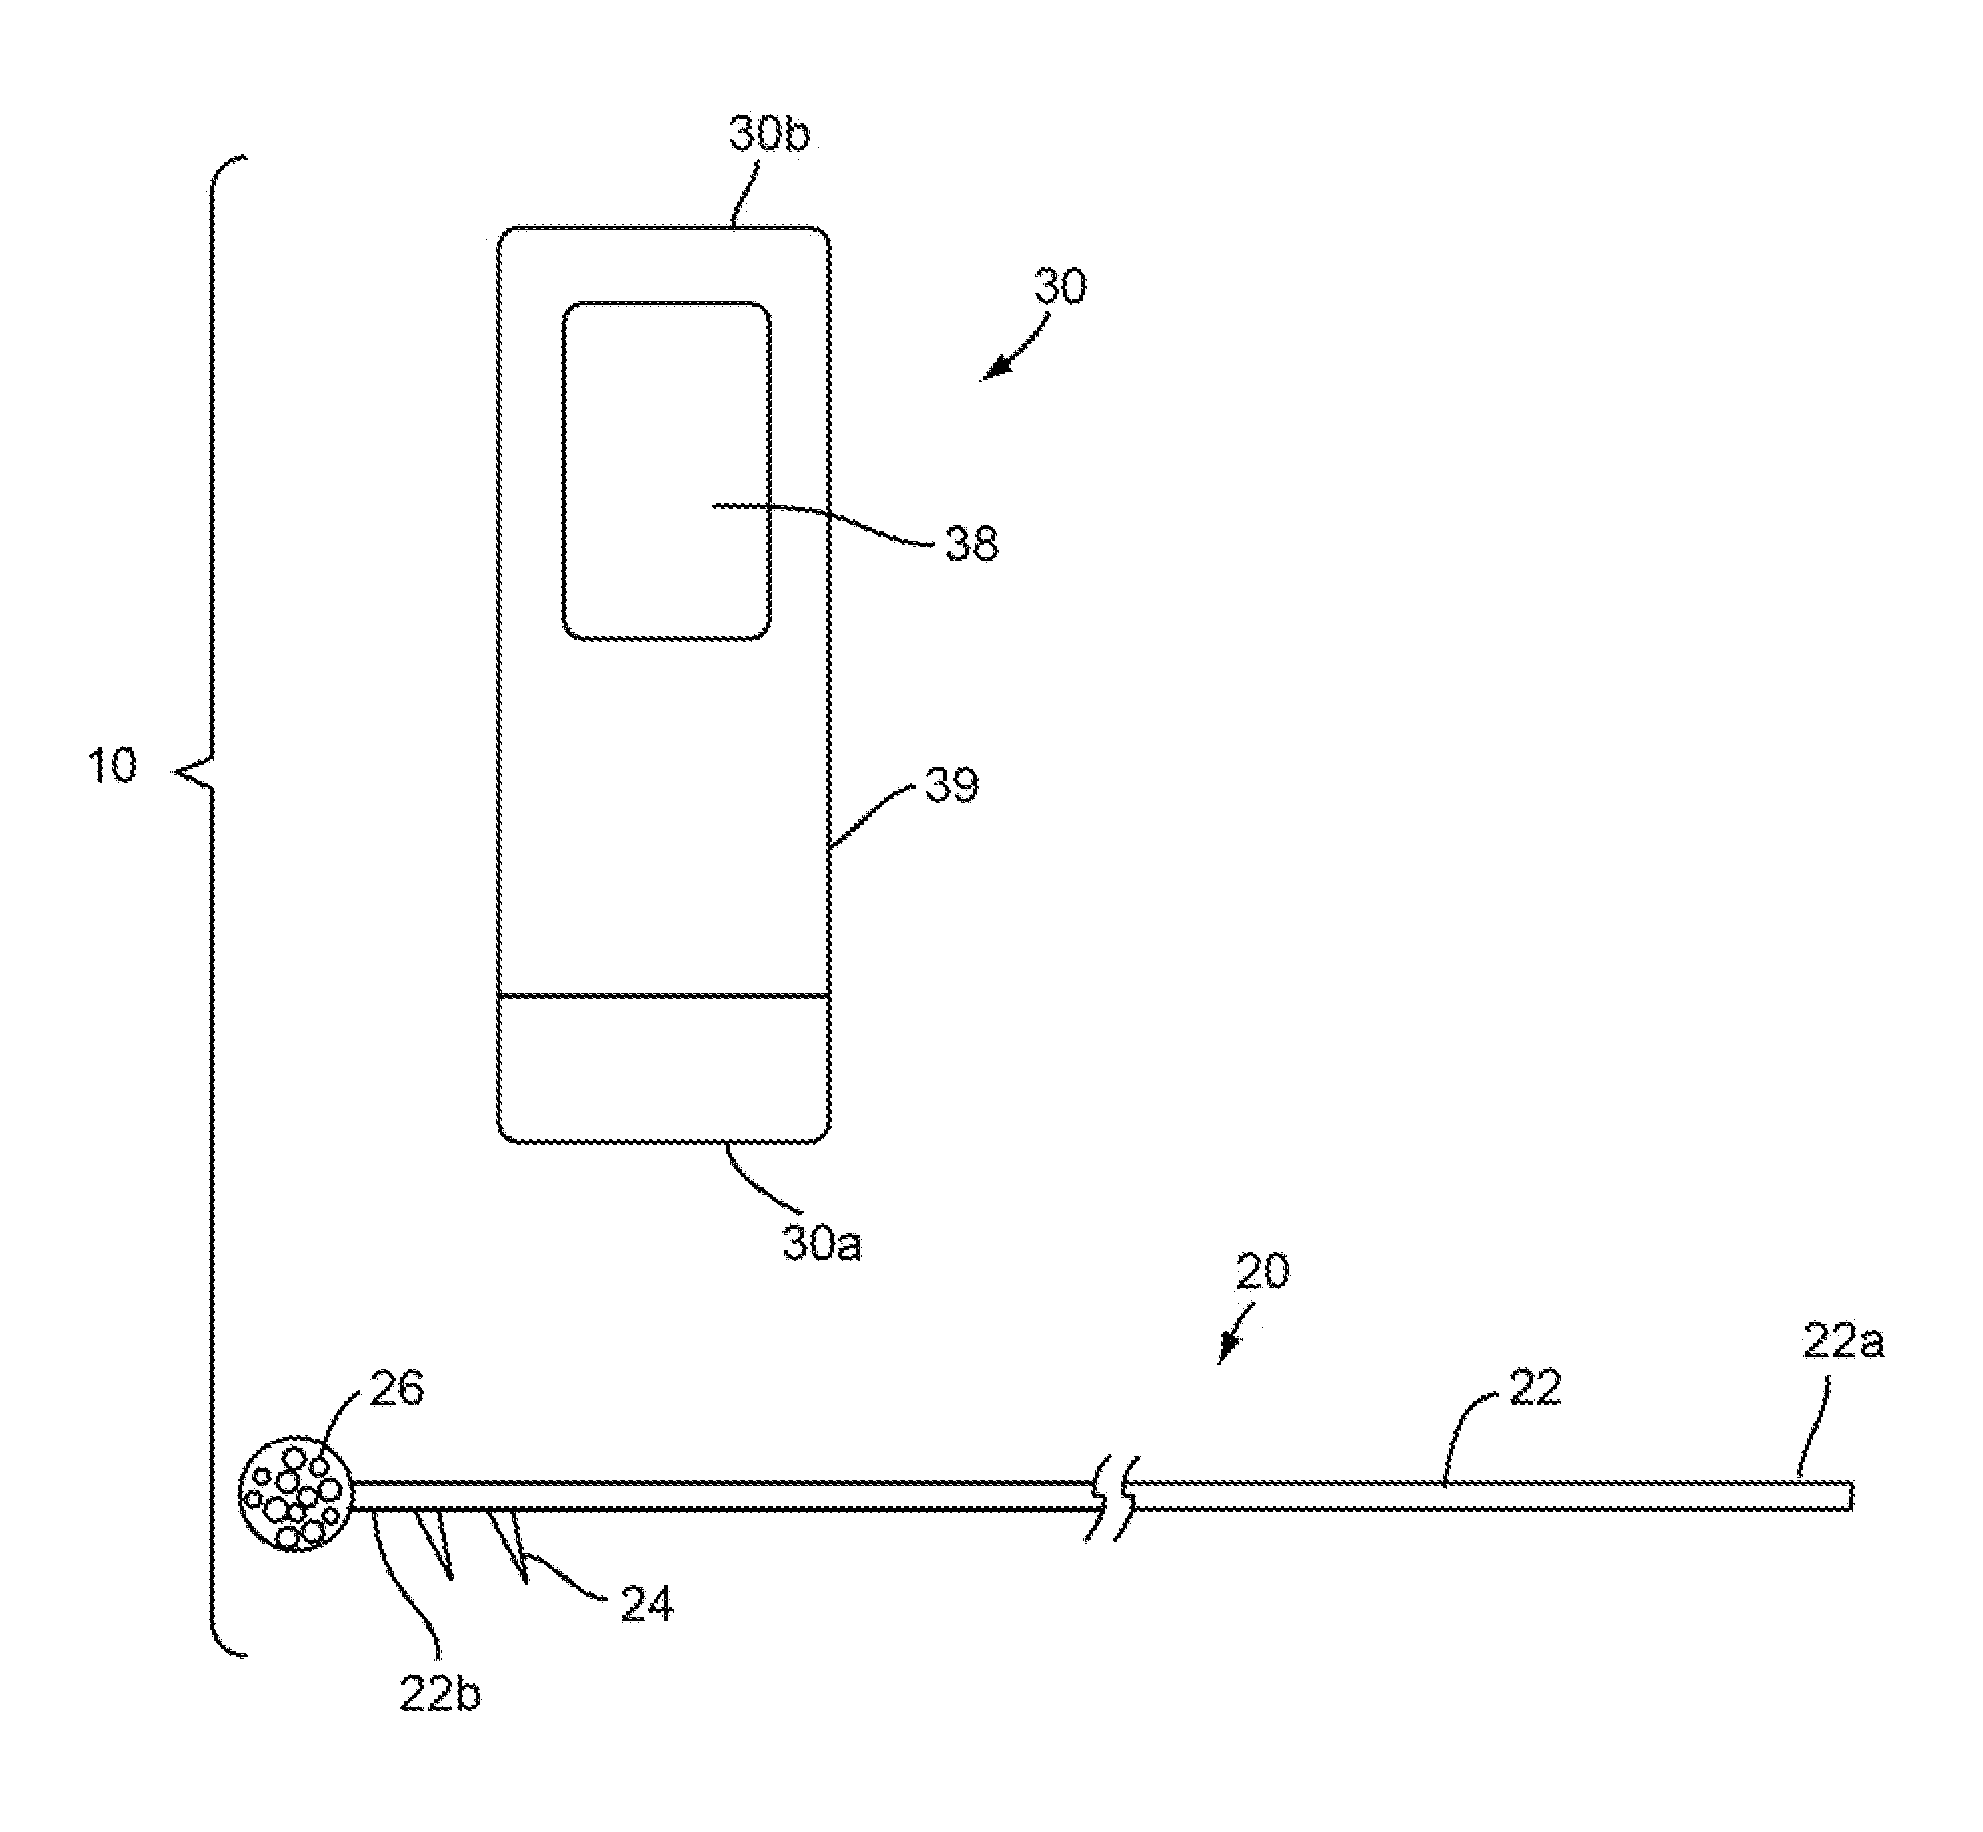 Apparatus, systems, and methods for localizing markers or tissue structures within a body